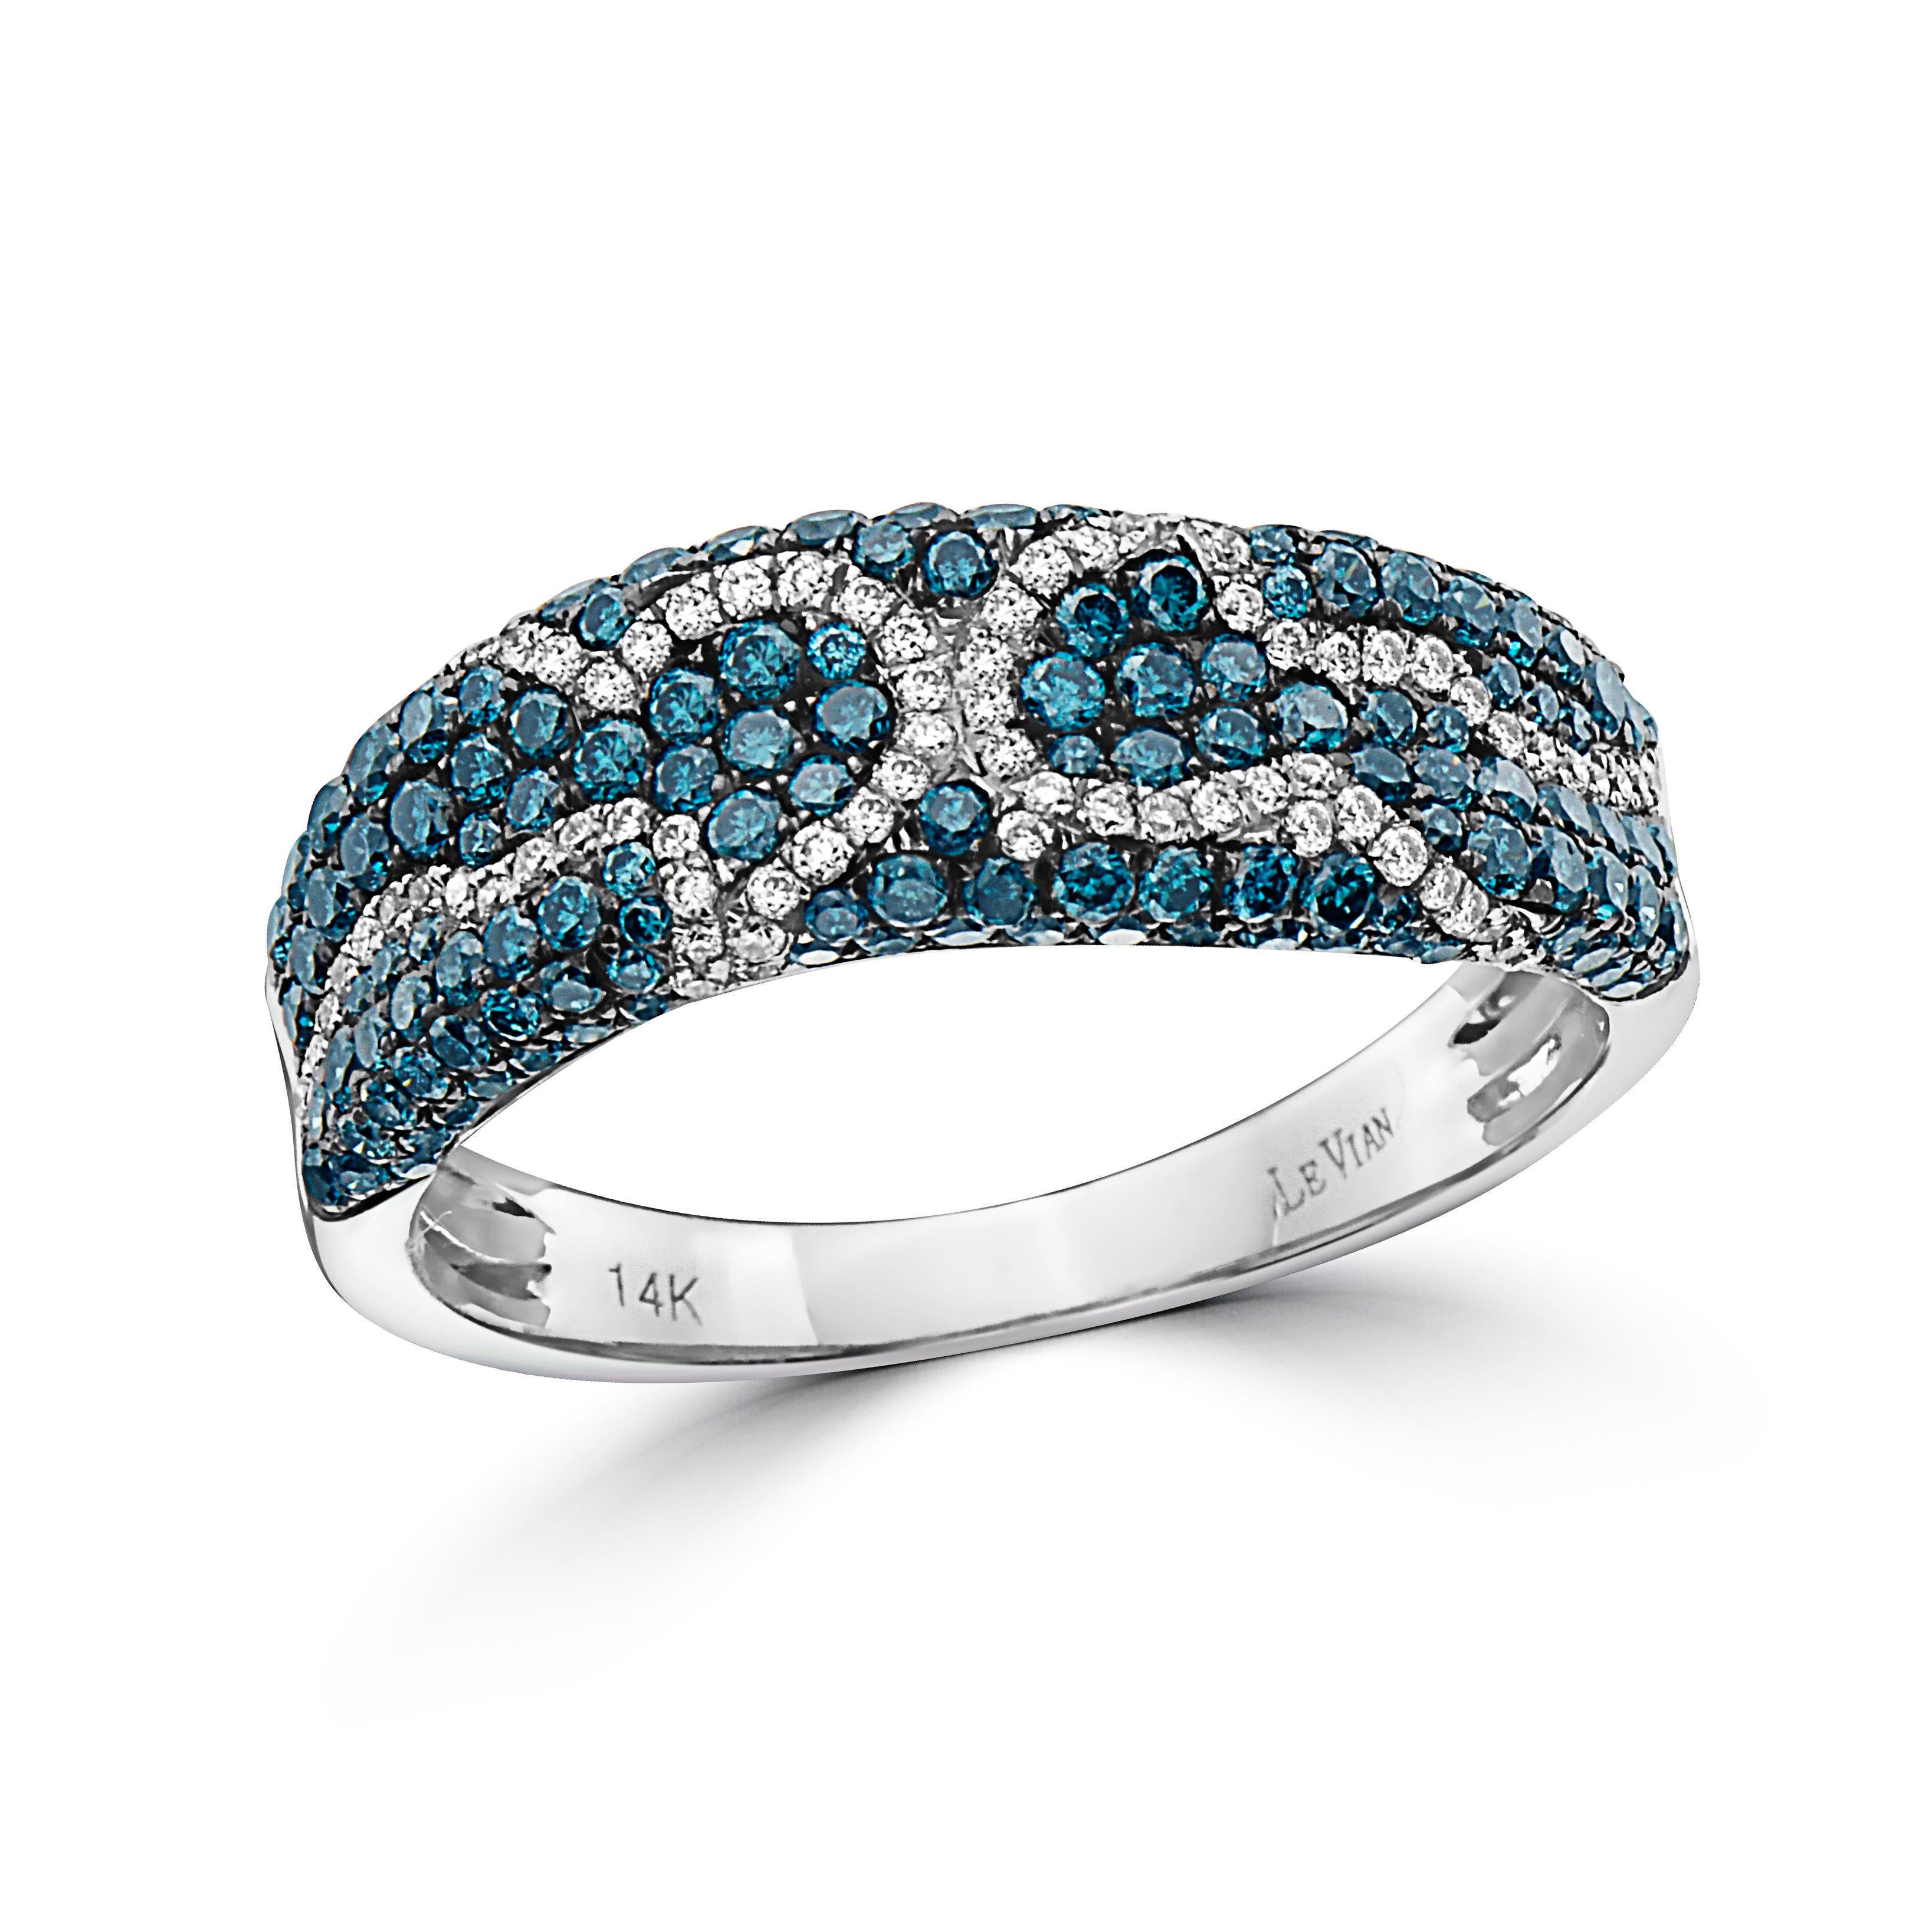 Grand Sample Sale Ring 7/8 cts Blue and White Natural Diamonds in 14K White Gold